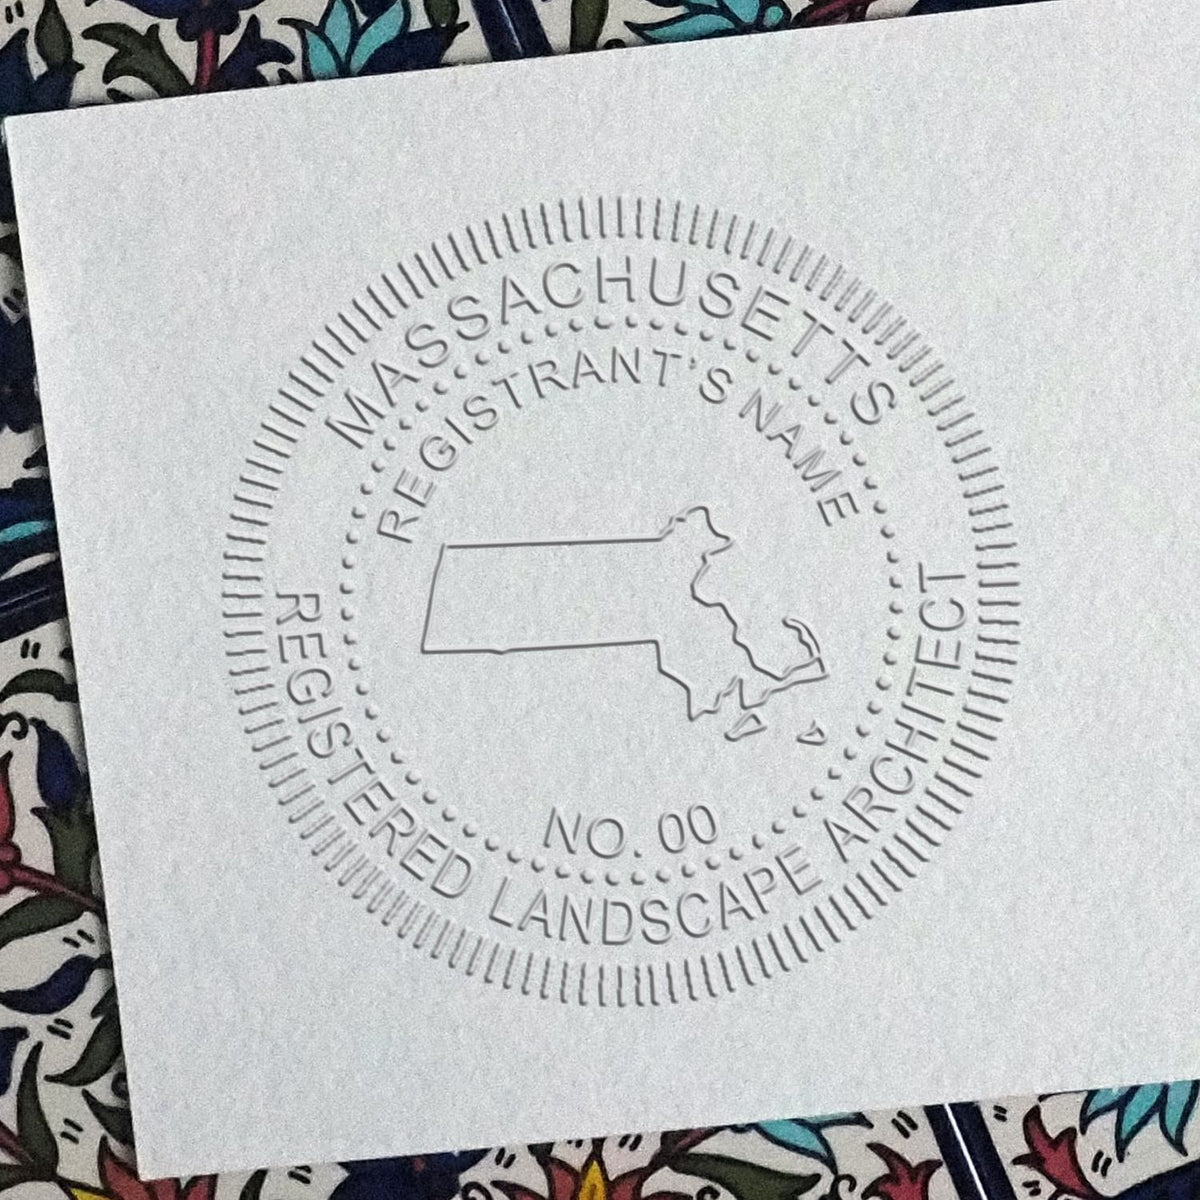 The Gift Massachusetts Landscape Architect Seal stamp impression comes to life with a crisp, detailed image stamped on paper - showcasing true professional quality.